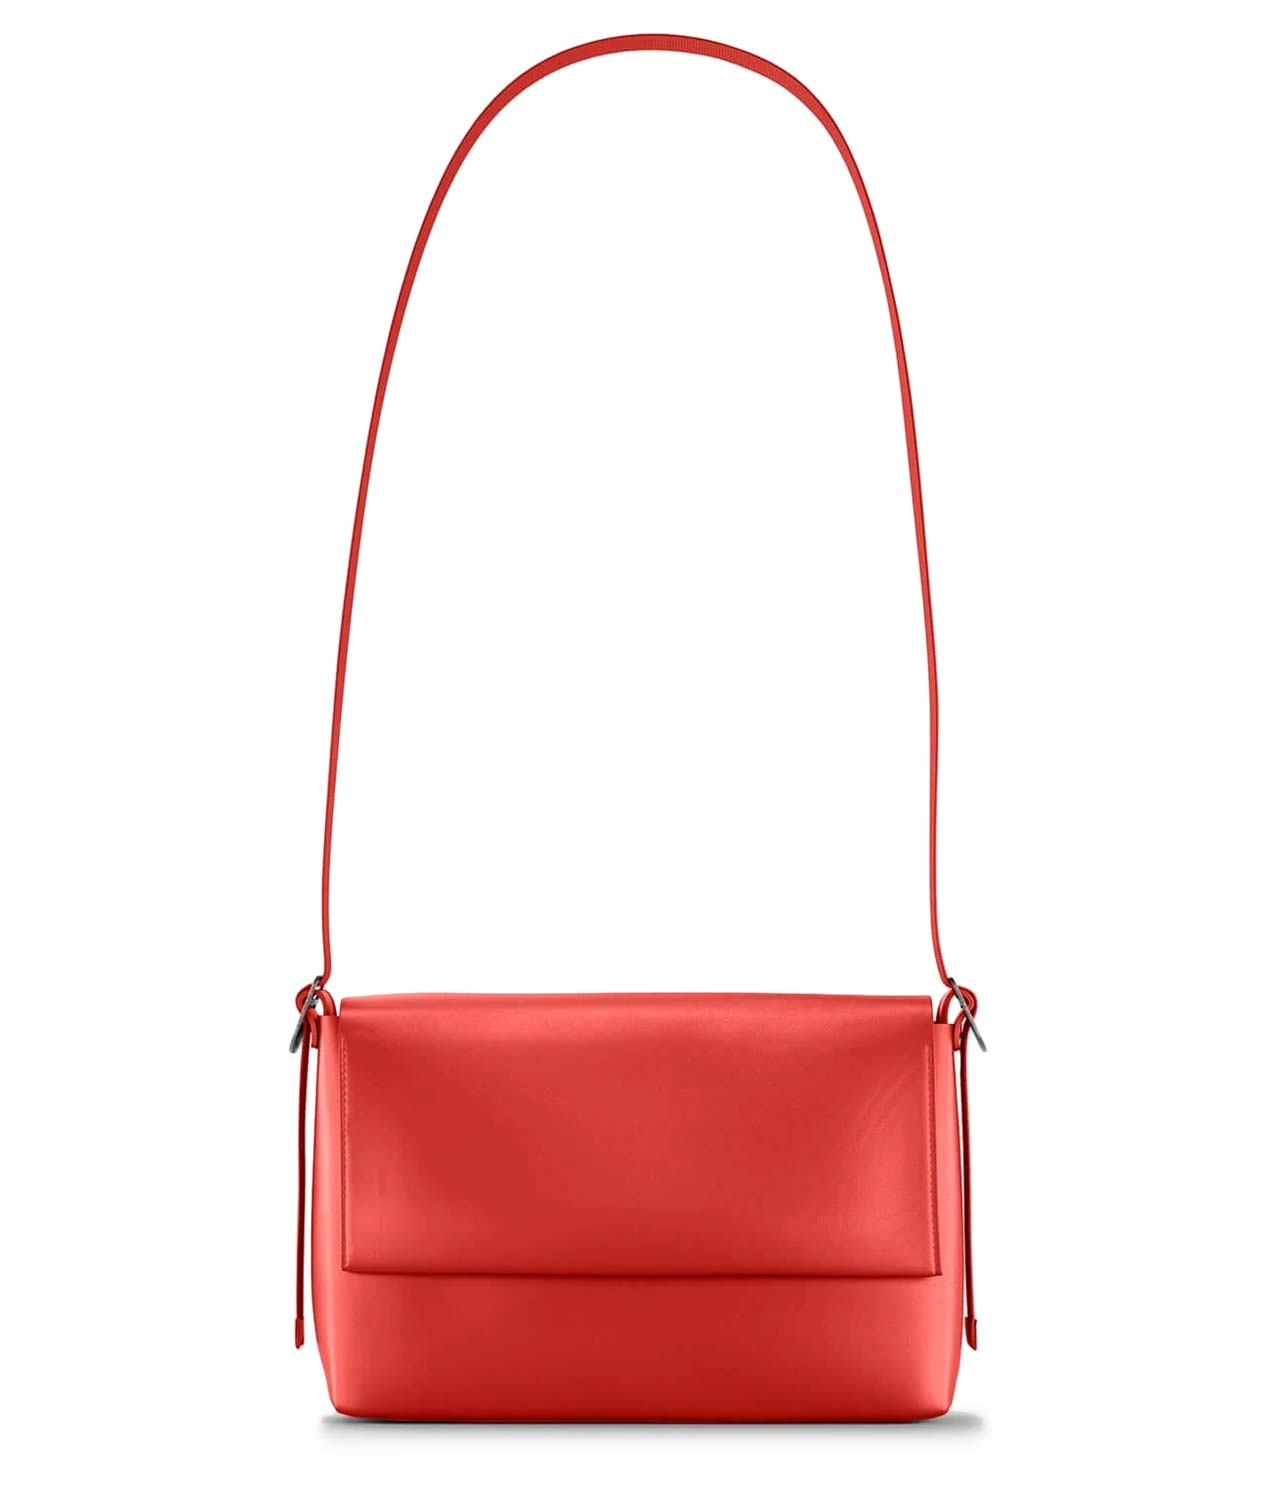 Walk With Me Crossbody Bag - Red